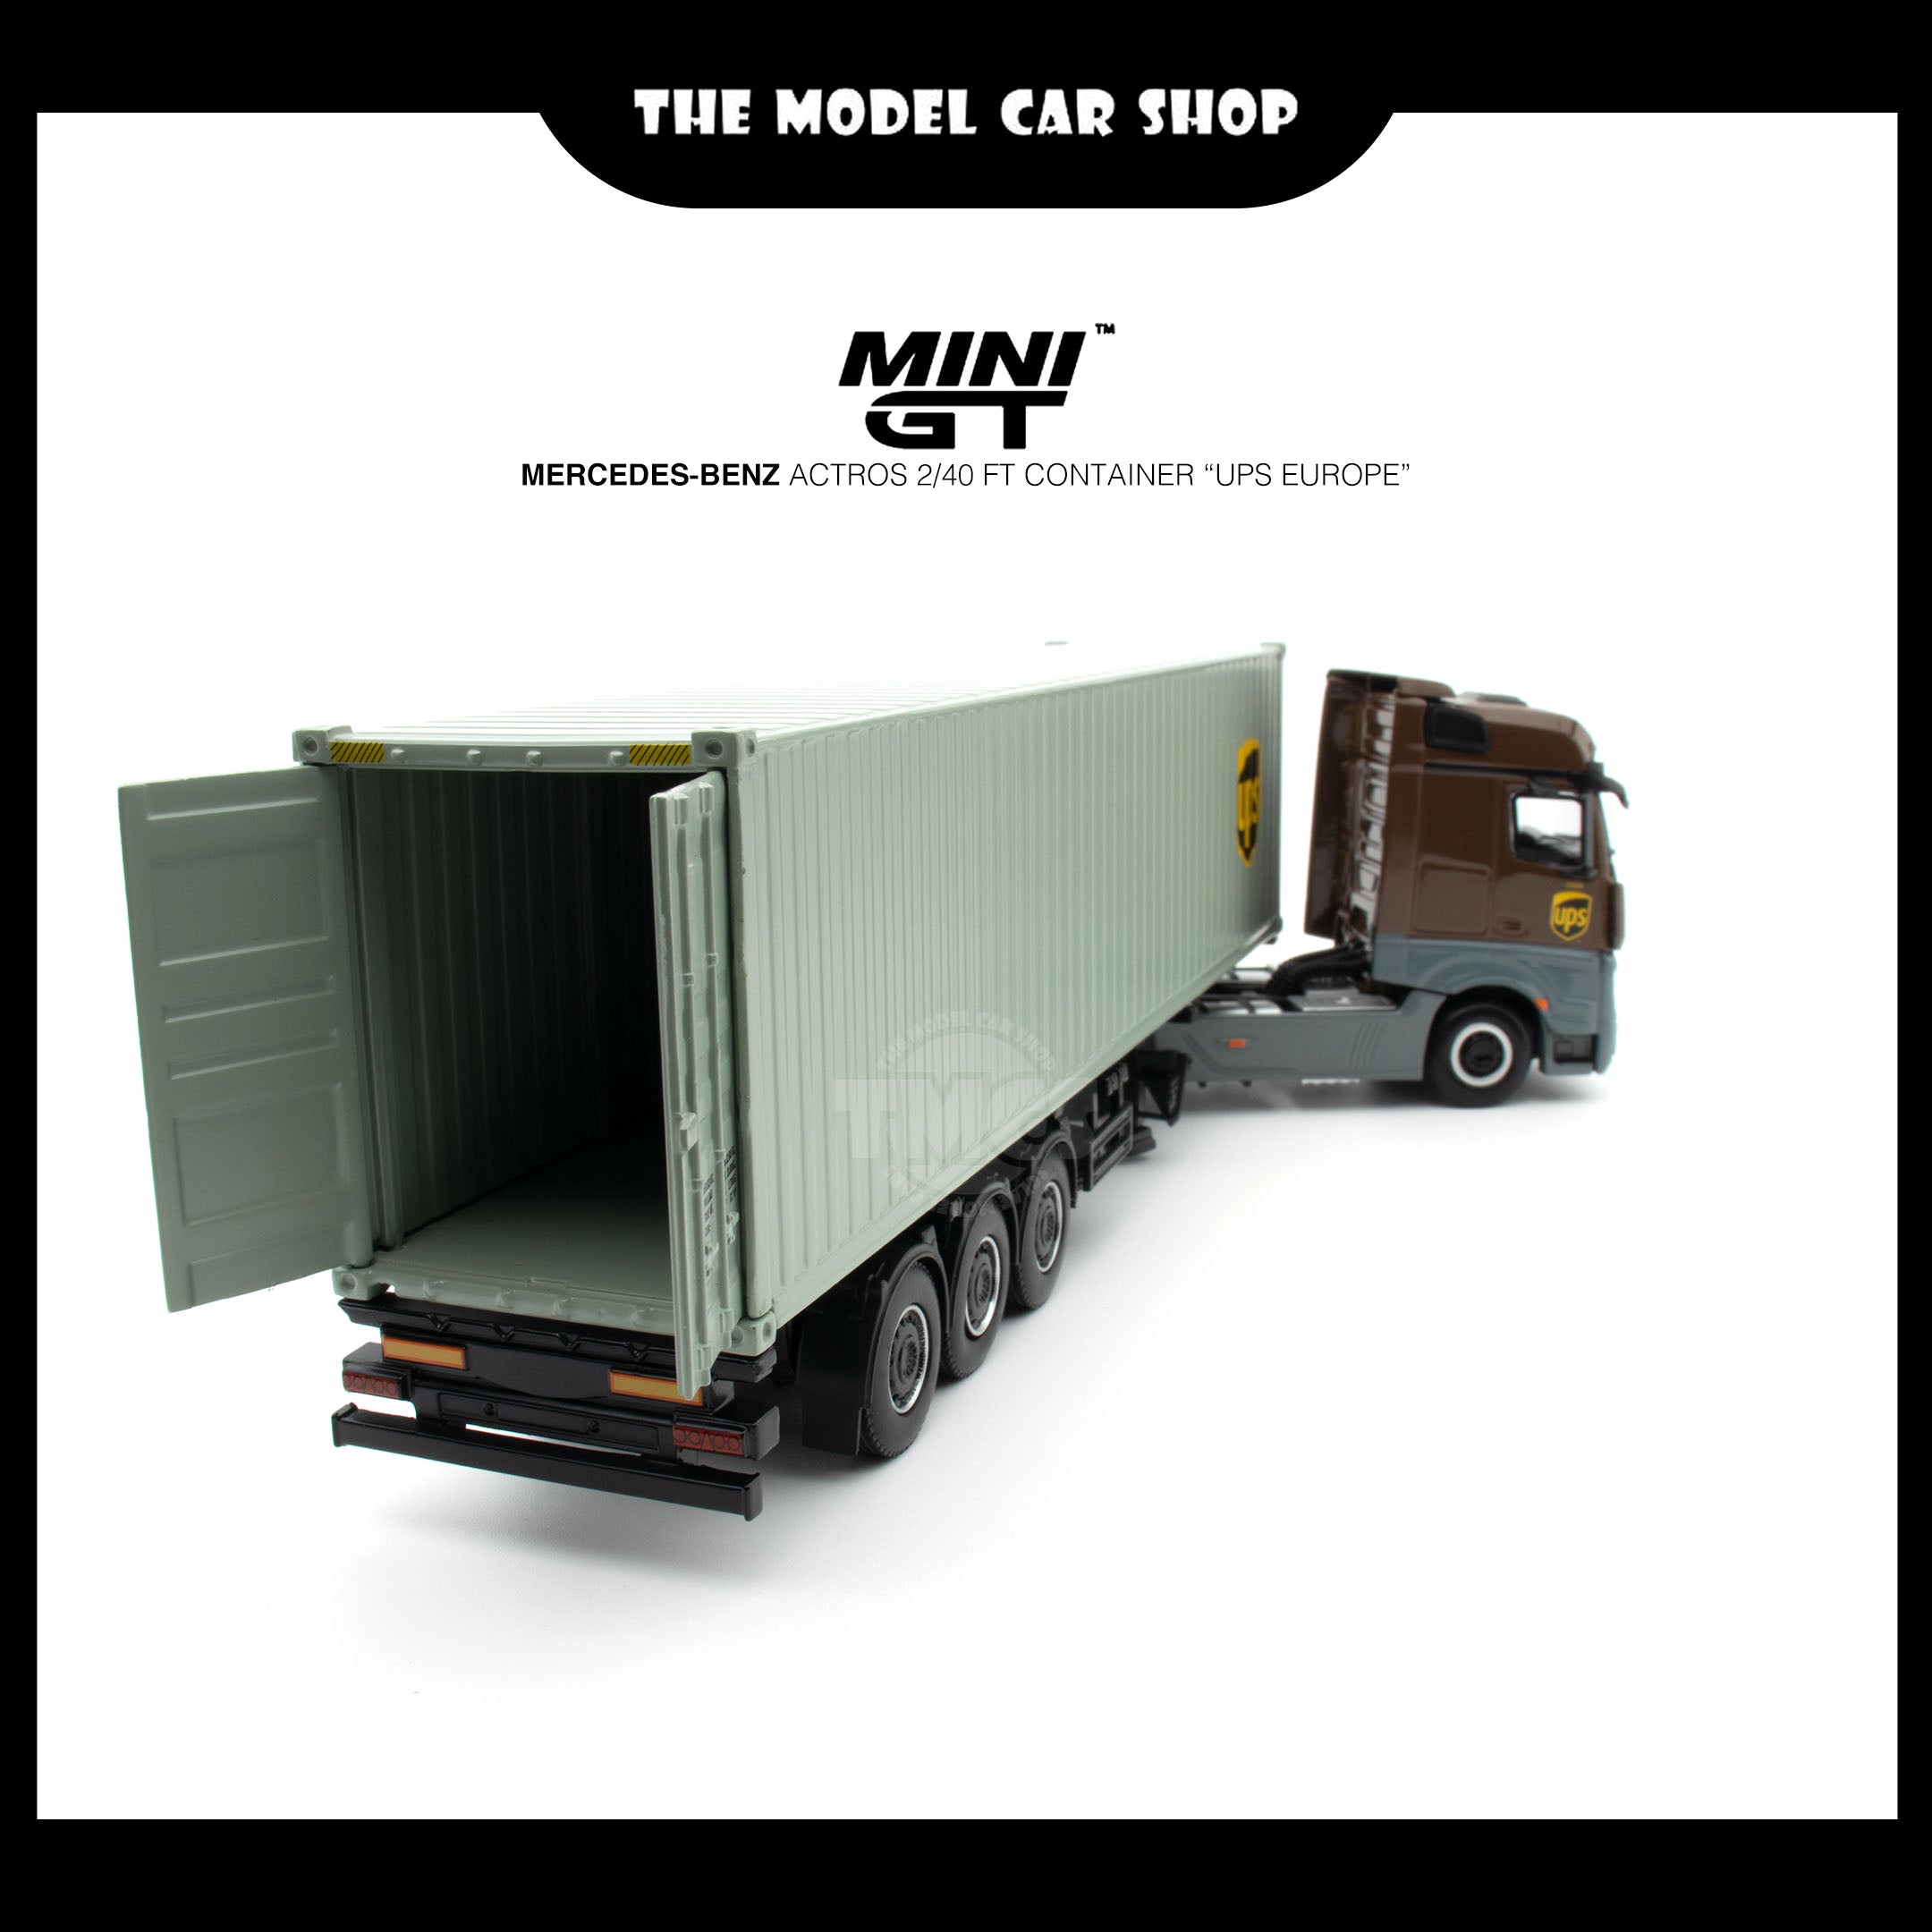 MINI GT] Mercedes-Benz Actros w/ 40 Ft Container  UPS Europe | The Model  Car Shop